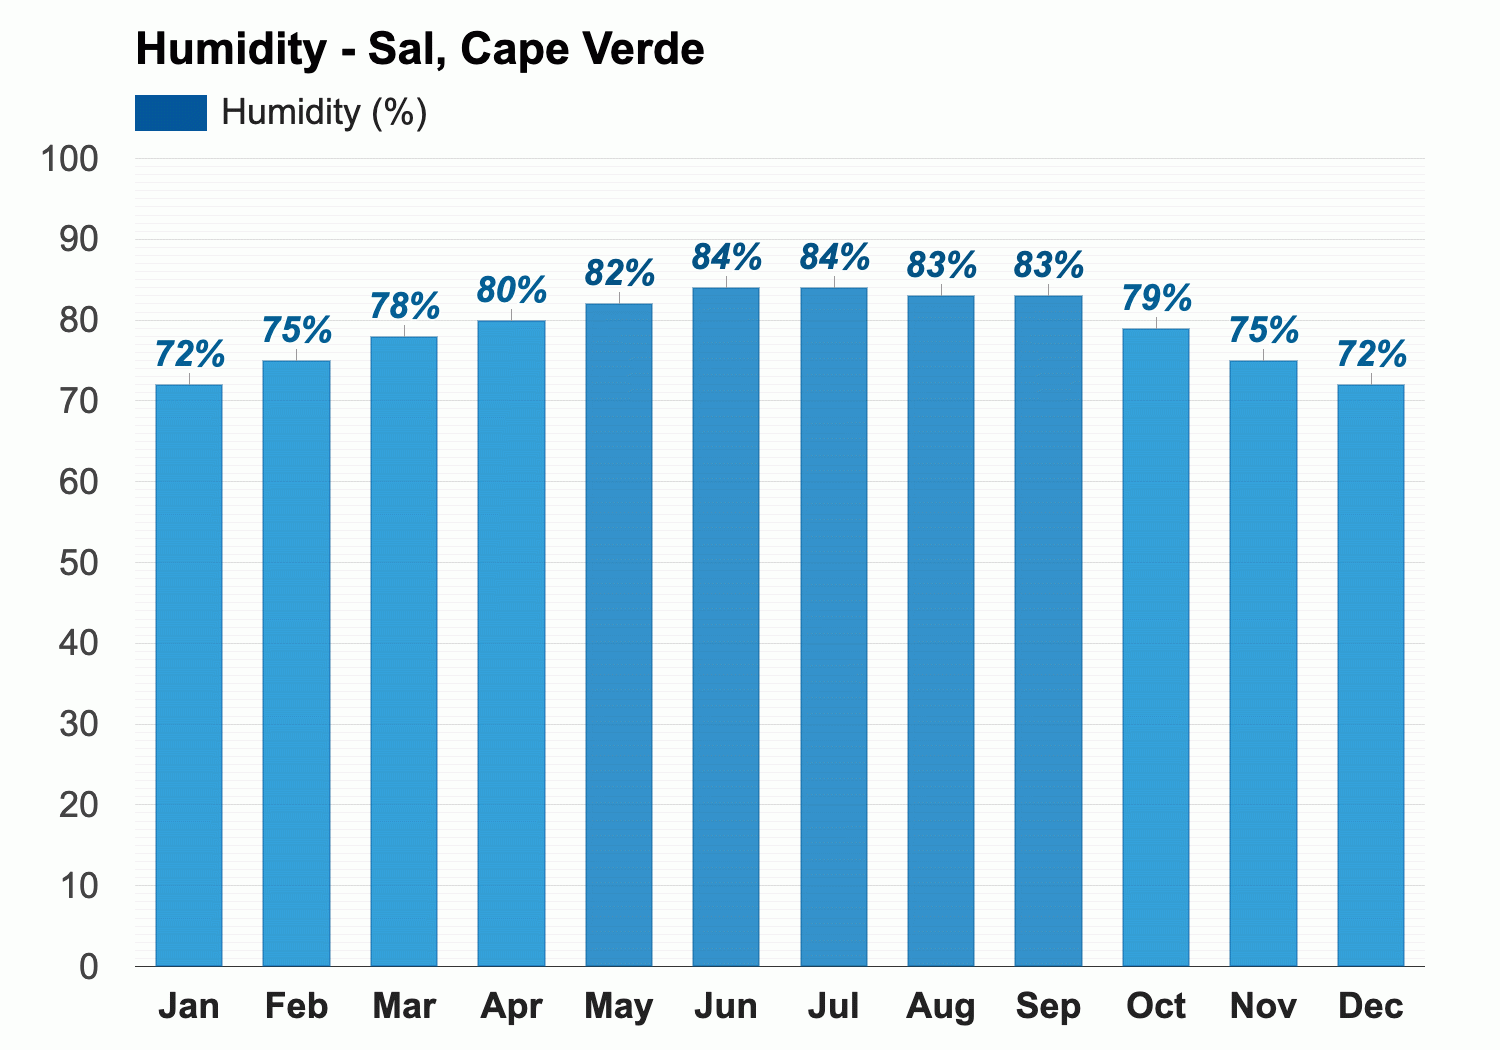 Sal, Cape Verde - March weather forecast and climate information | Weather  Atlas